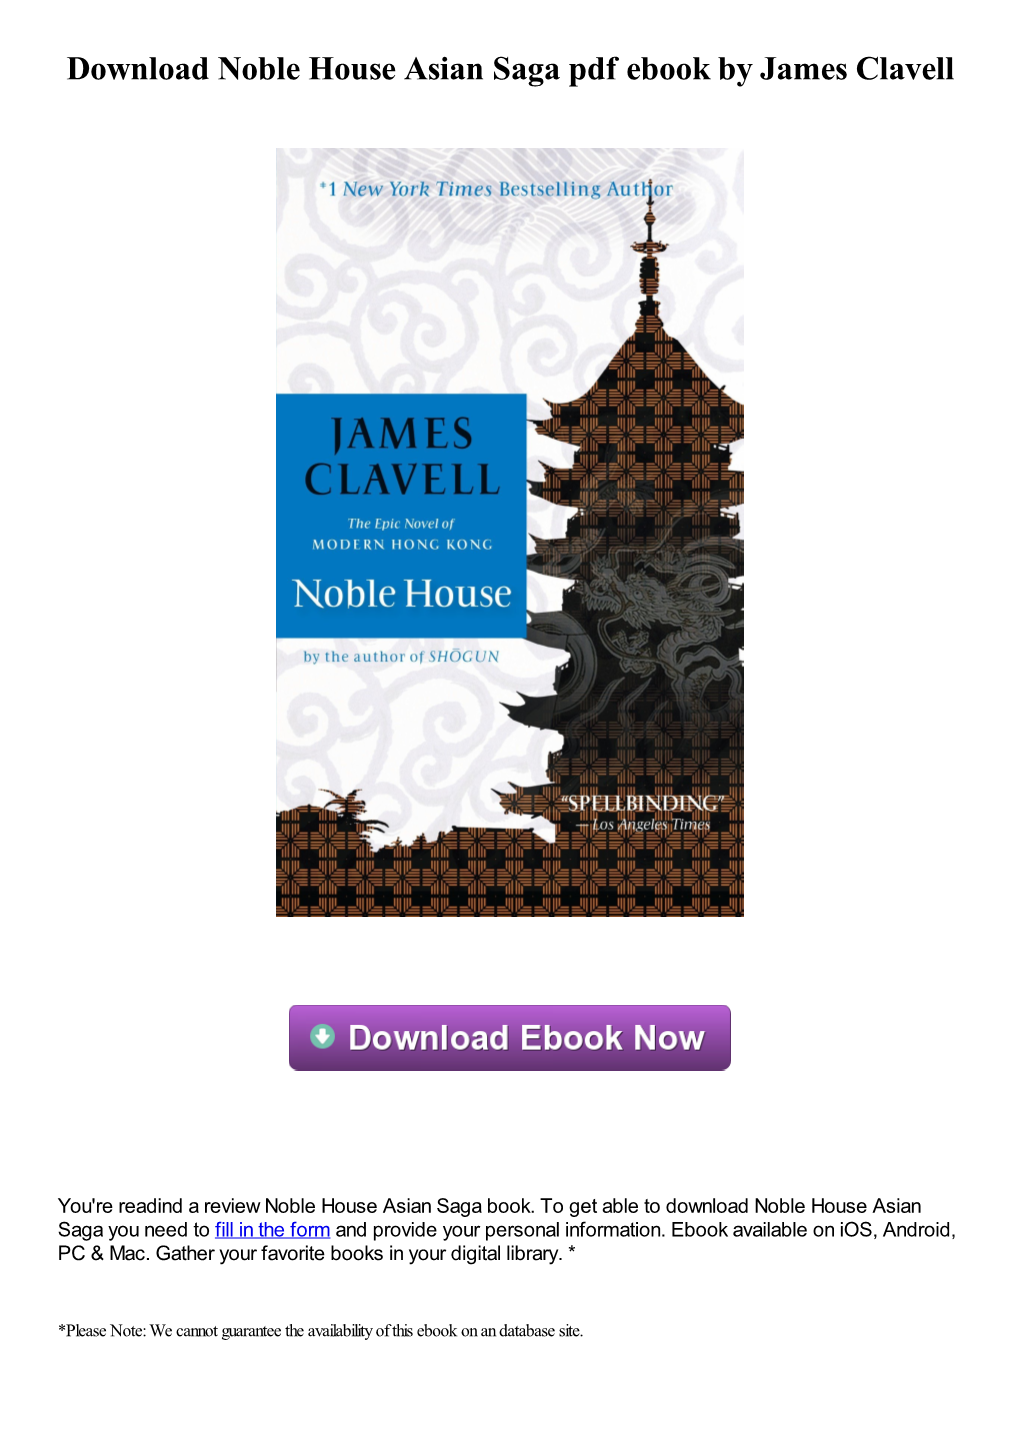 Download Noble House Asian Saga Pdf Book by James Clavell